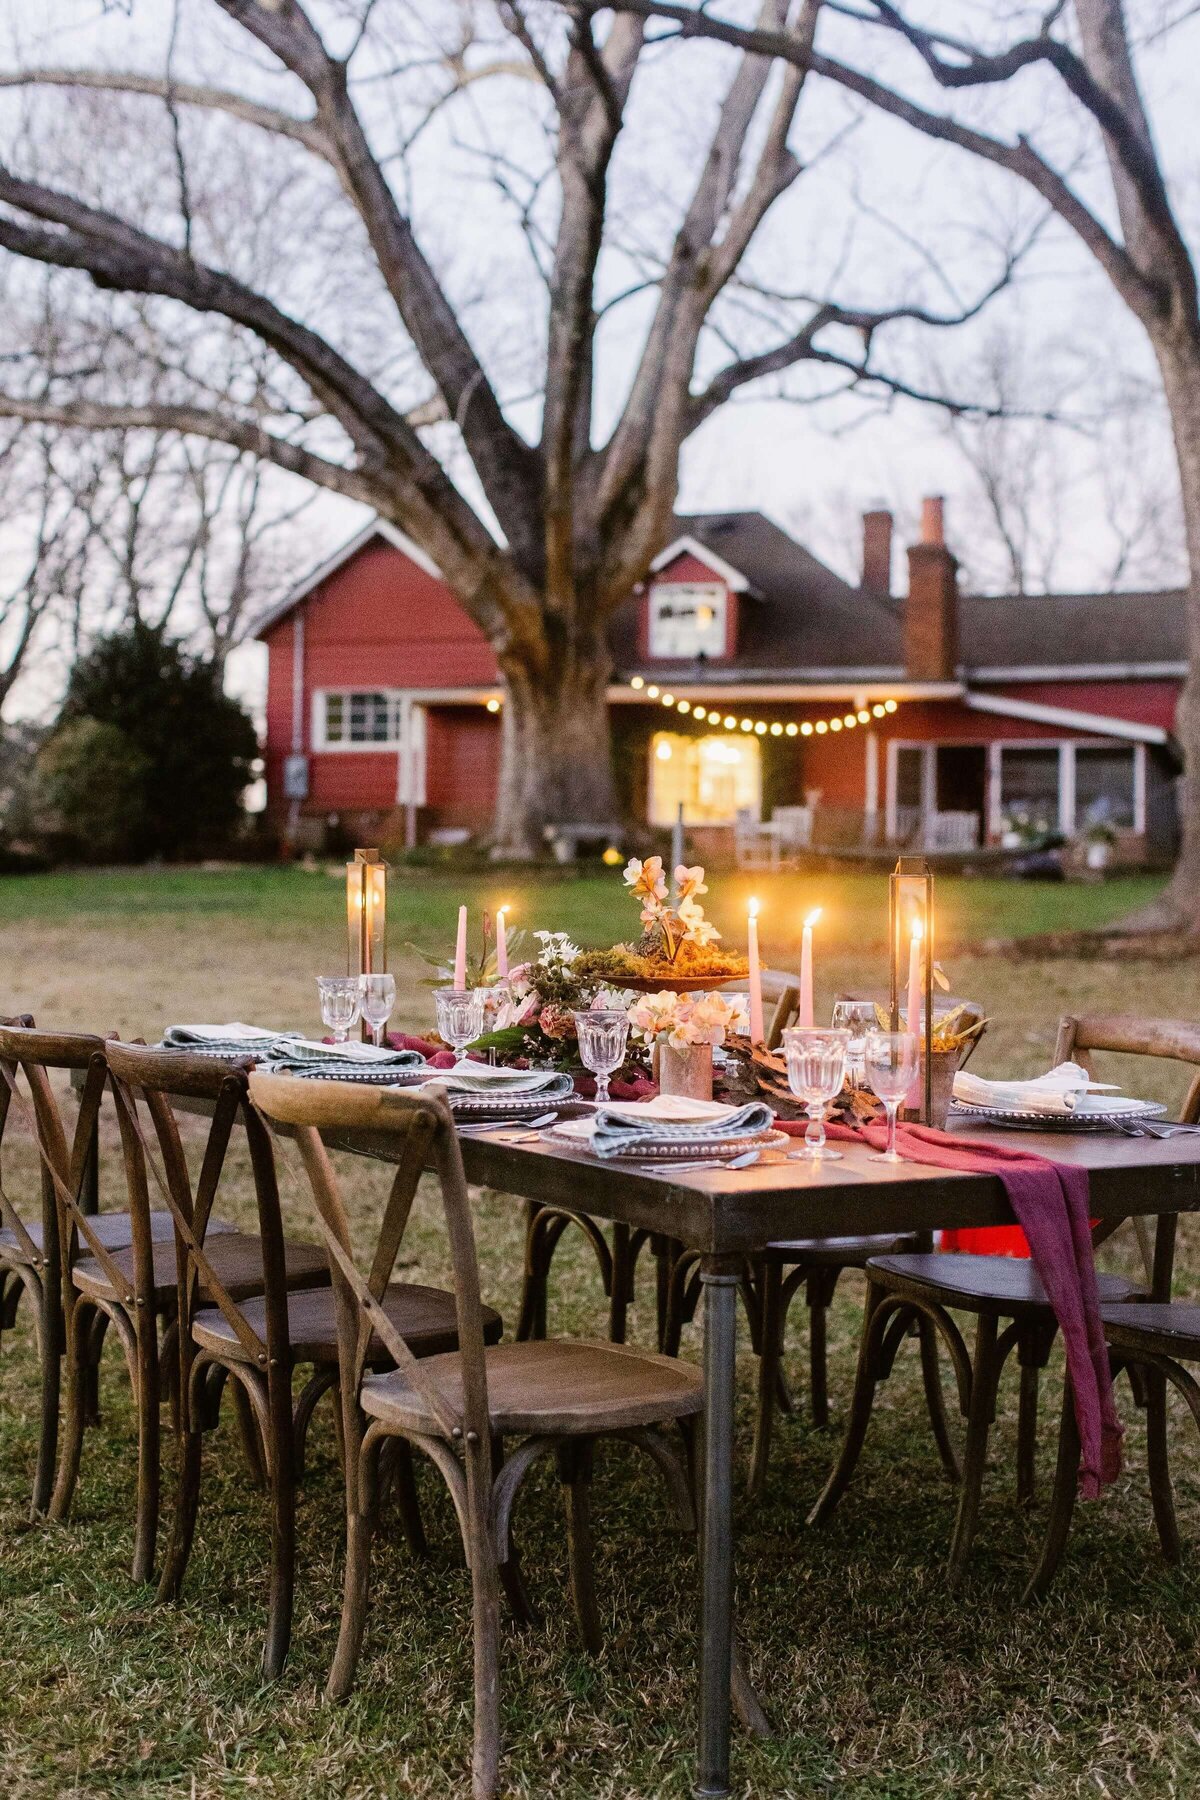 Evening outdoor wedding at Historic Red Farm